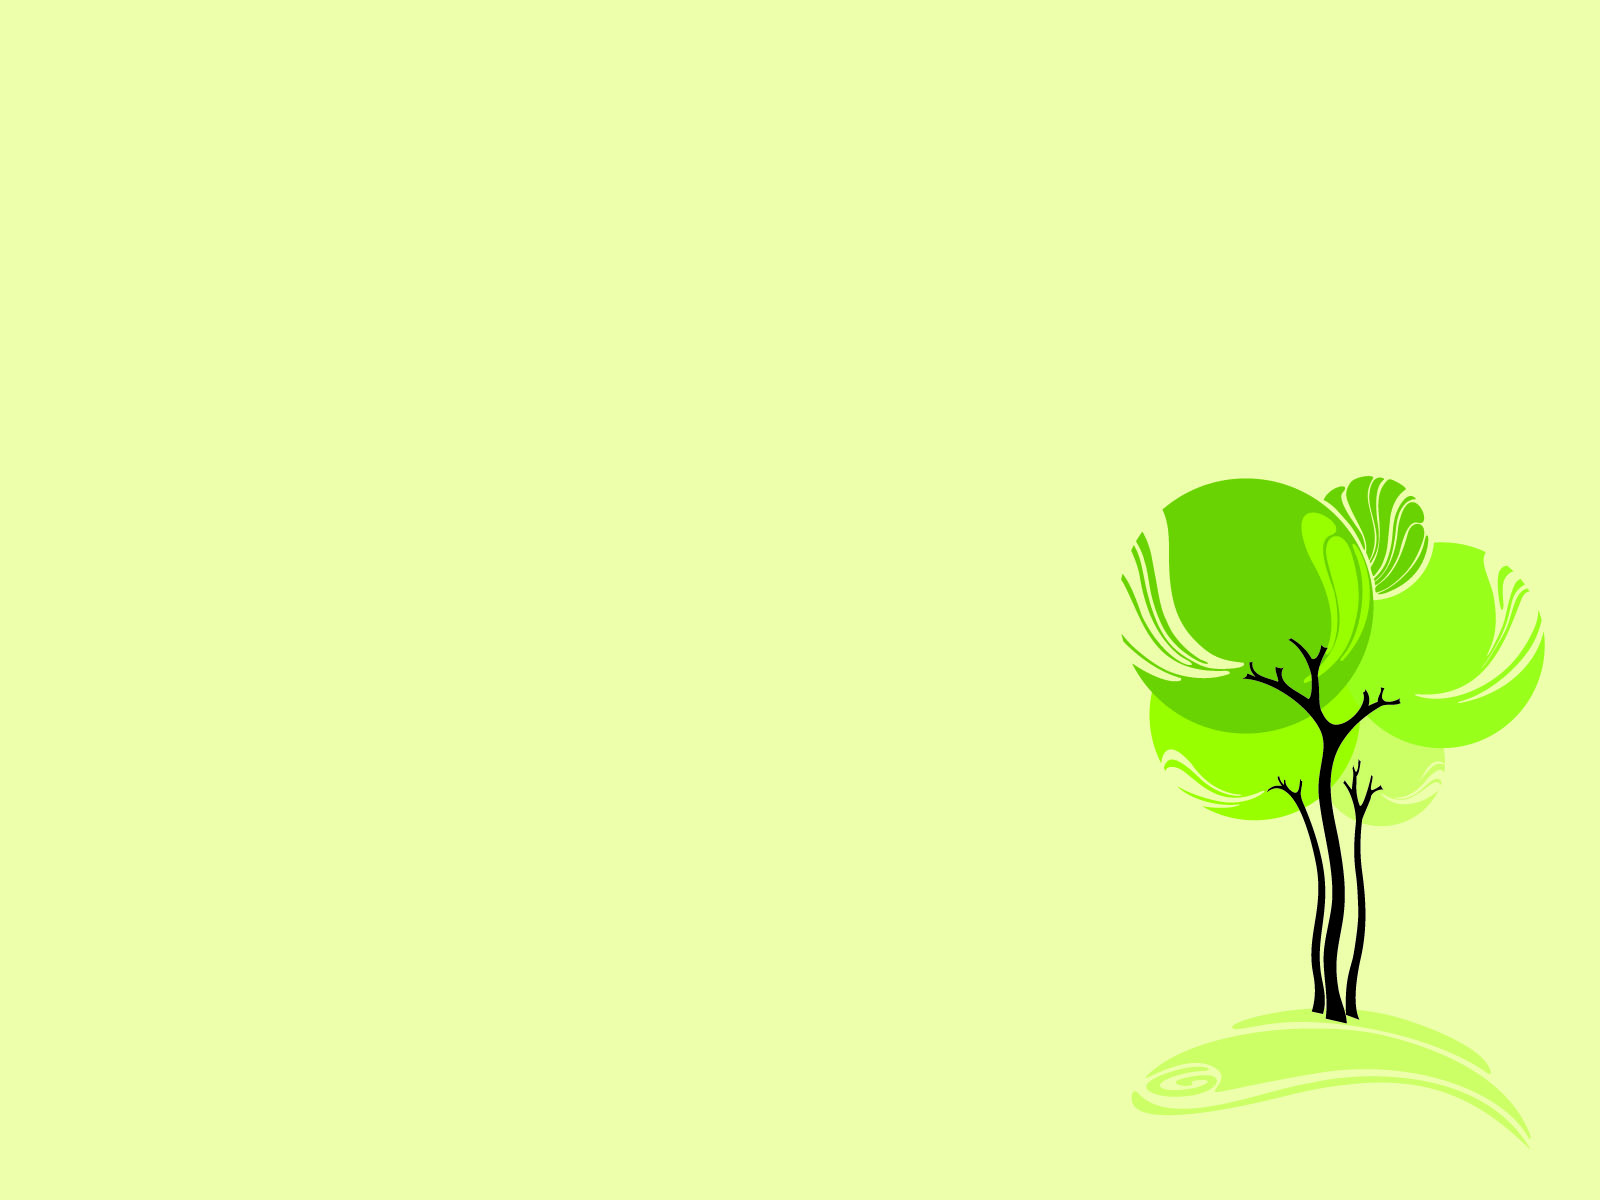 Green Design Tree Backgrounds | Nature Templates | Free PPT Grounds